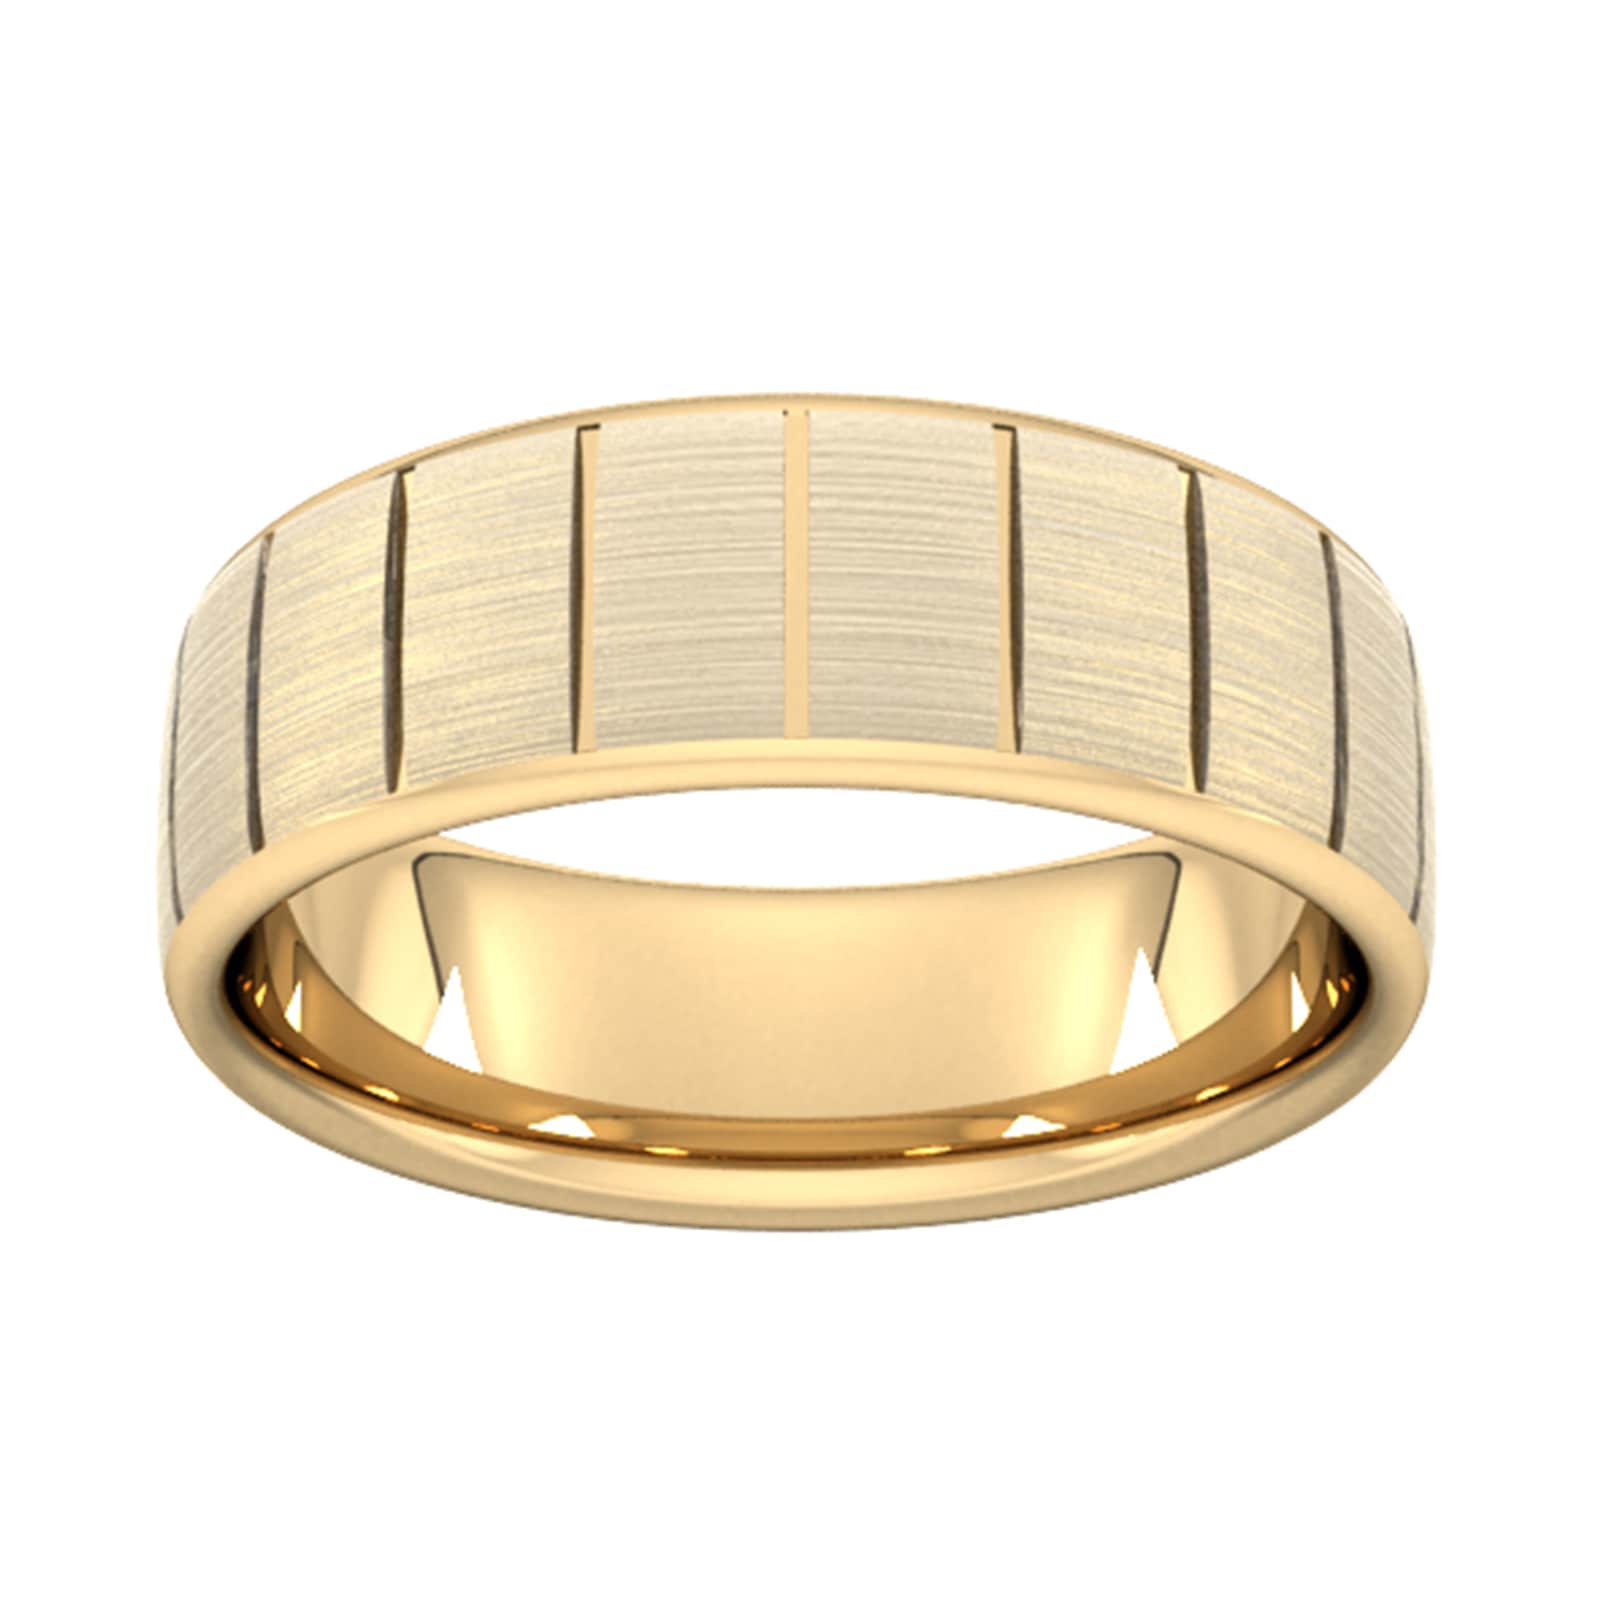 8mm D Shape Heavy Vertical Lines Wedding Ring In 18 Carat Yellow Gold - Ring Size Q